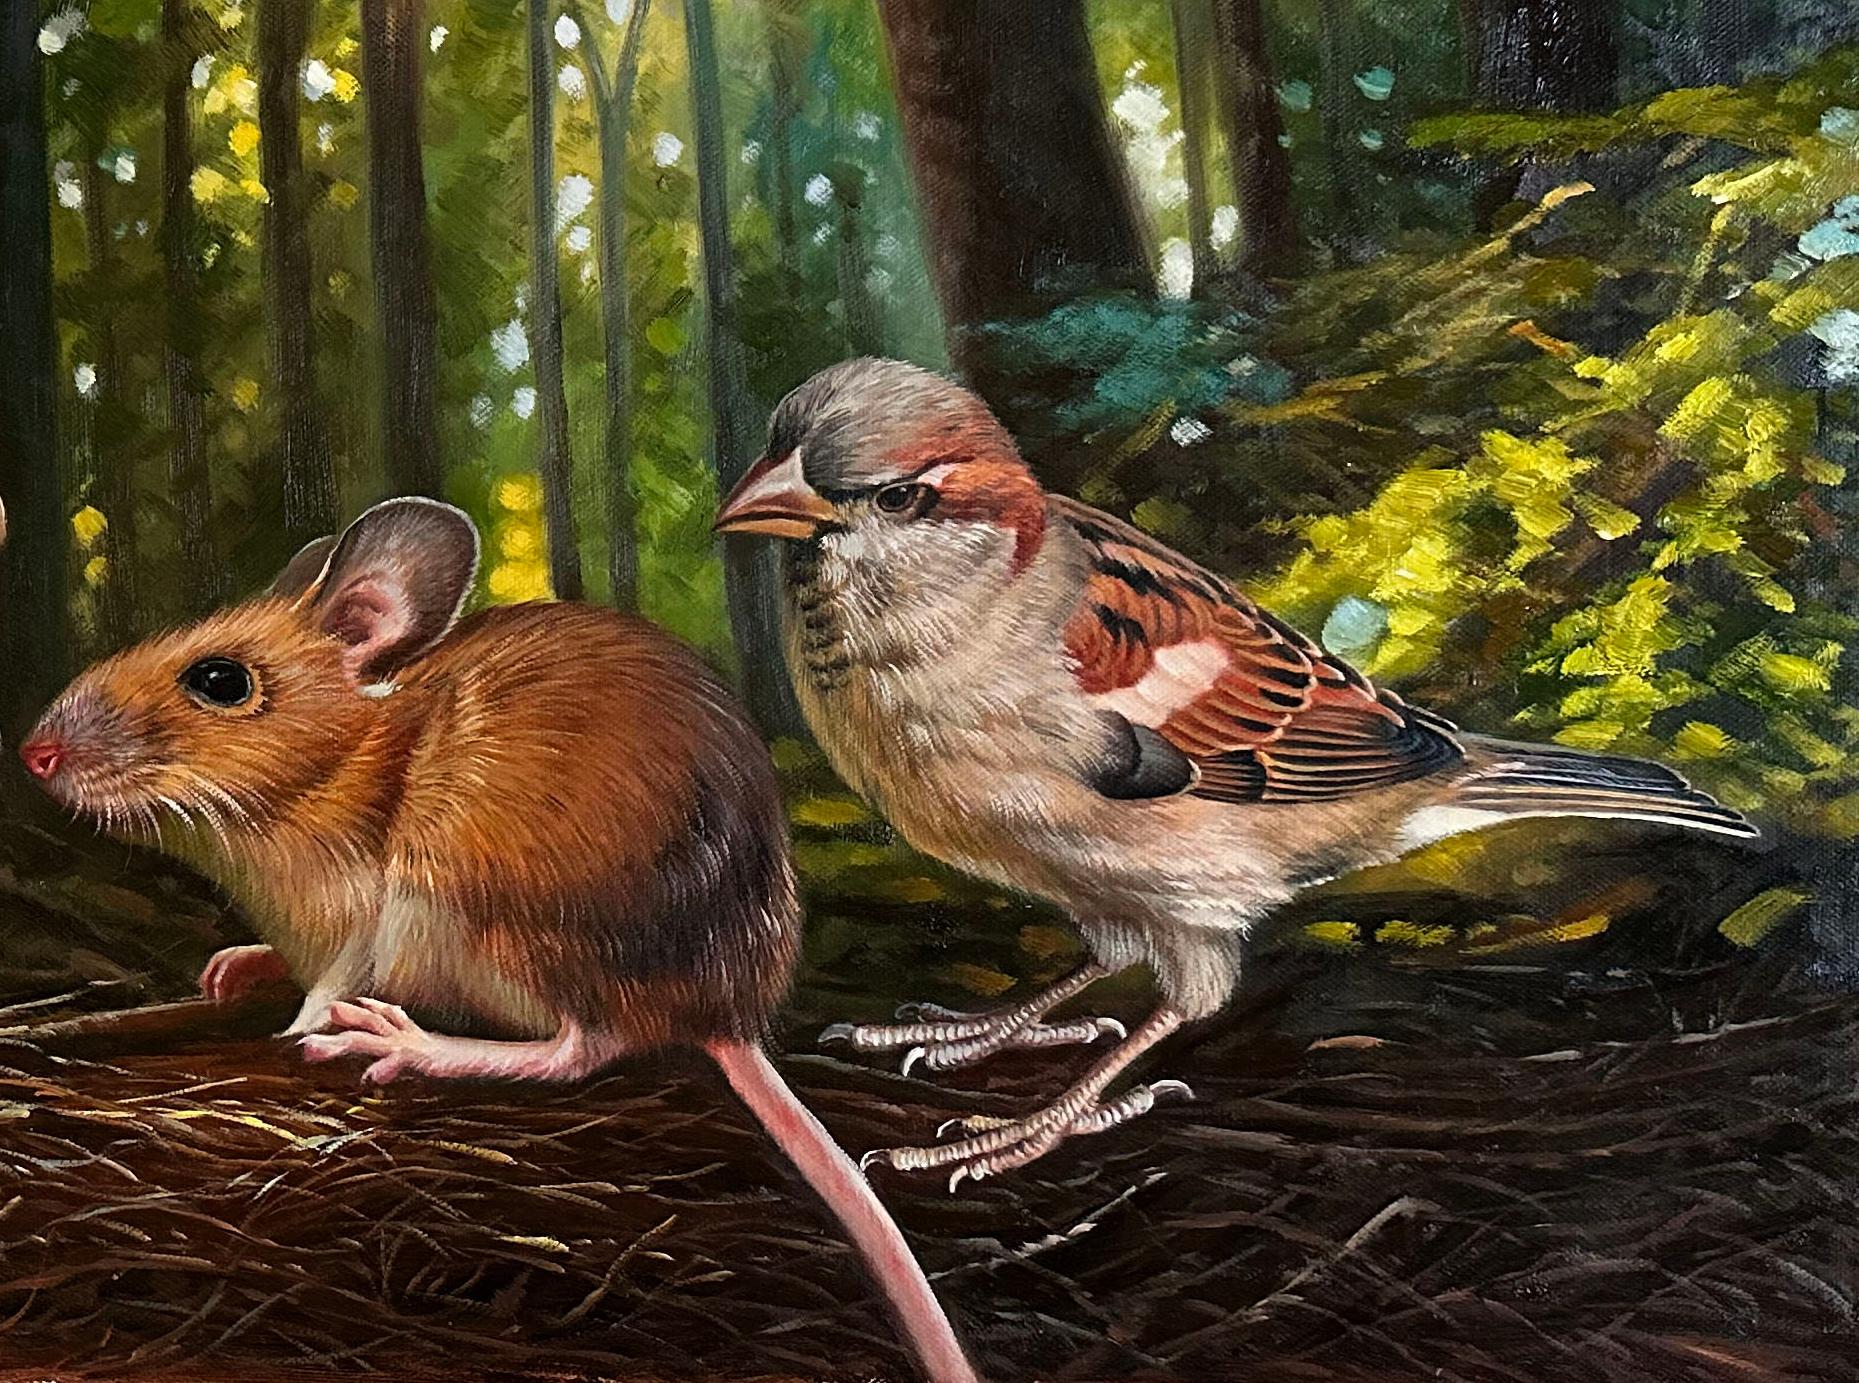 Sparrow and Jumping Mouse Find the Magic Mushrooms - Photorealist Painting by Marc Dennis